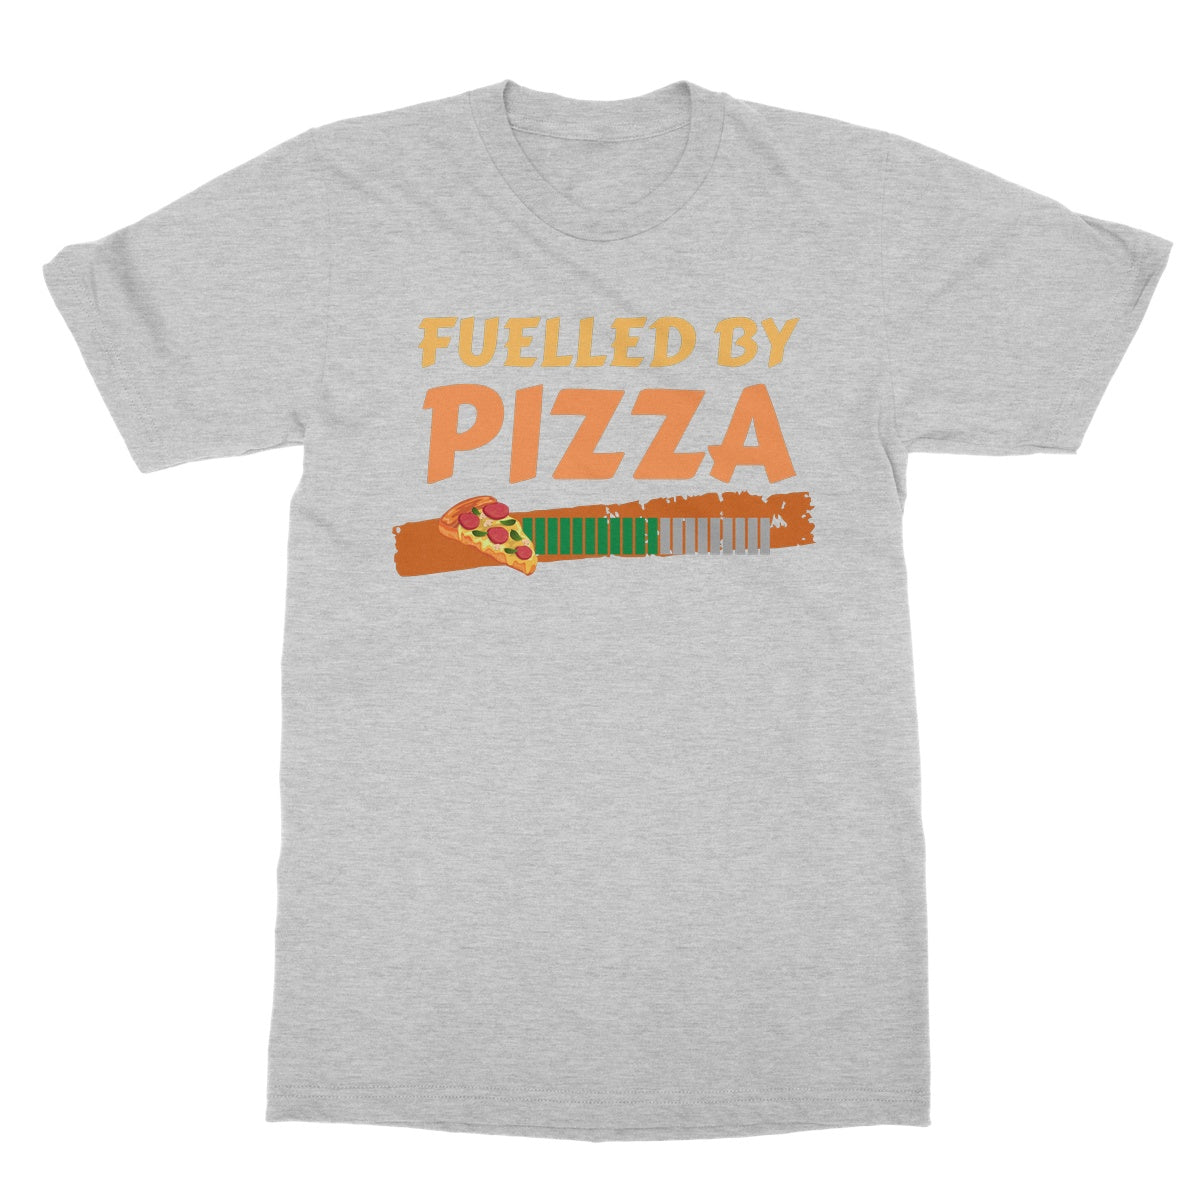 fuelled by pizza t shirt grey